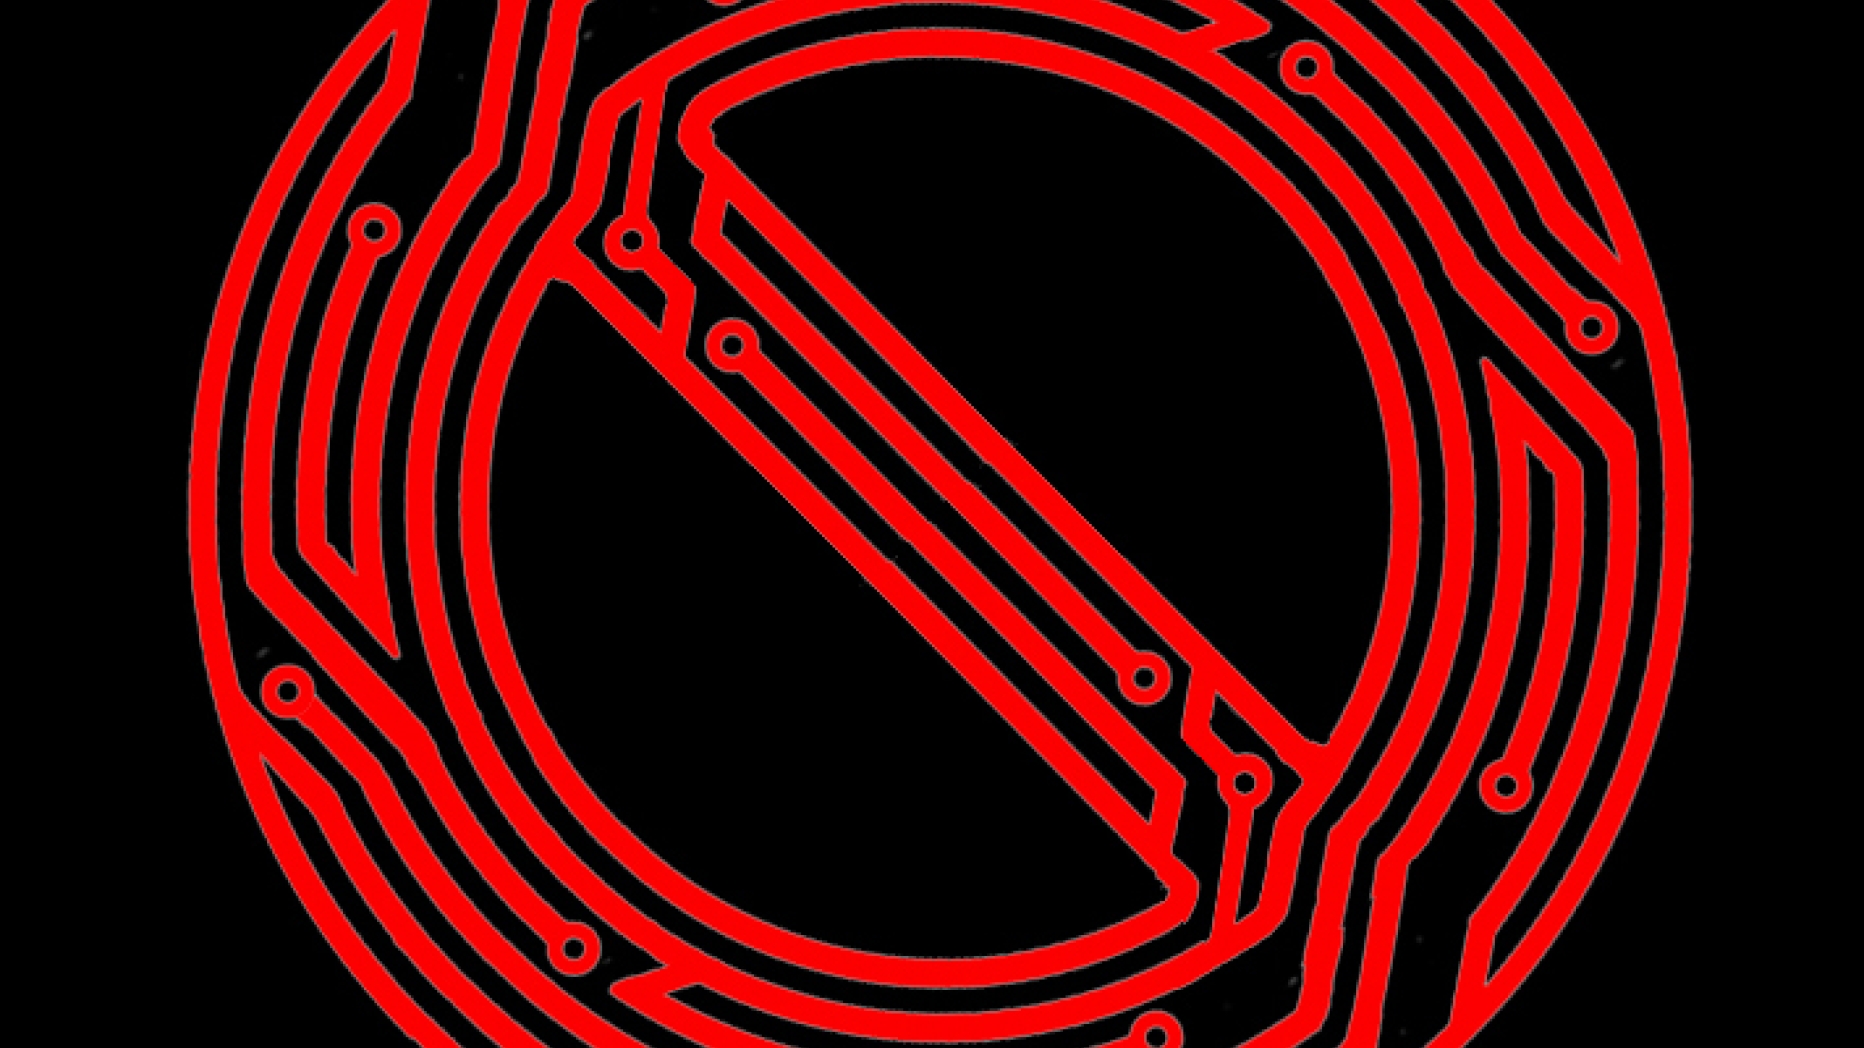 Image where the "No" sign where a line is drawn diagonally through a circle has been portrayed as if it has been turned in to a piece of computer circuitry.